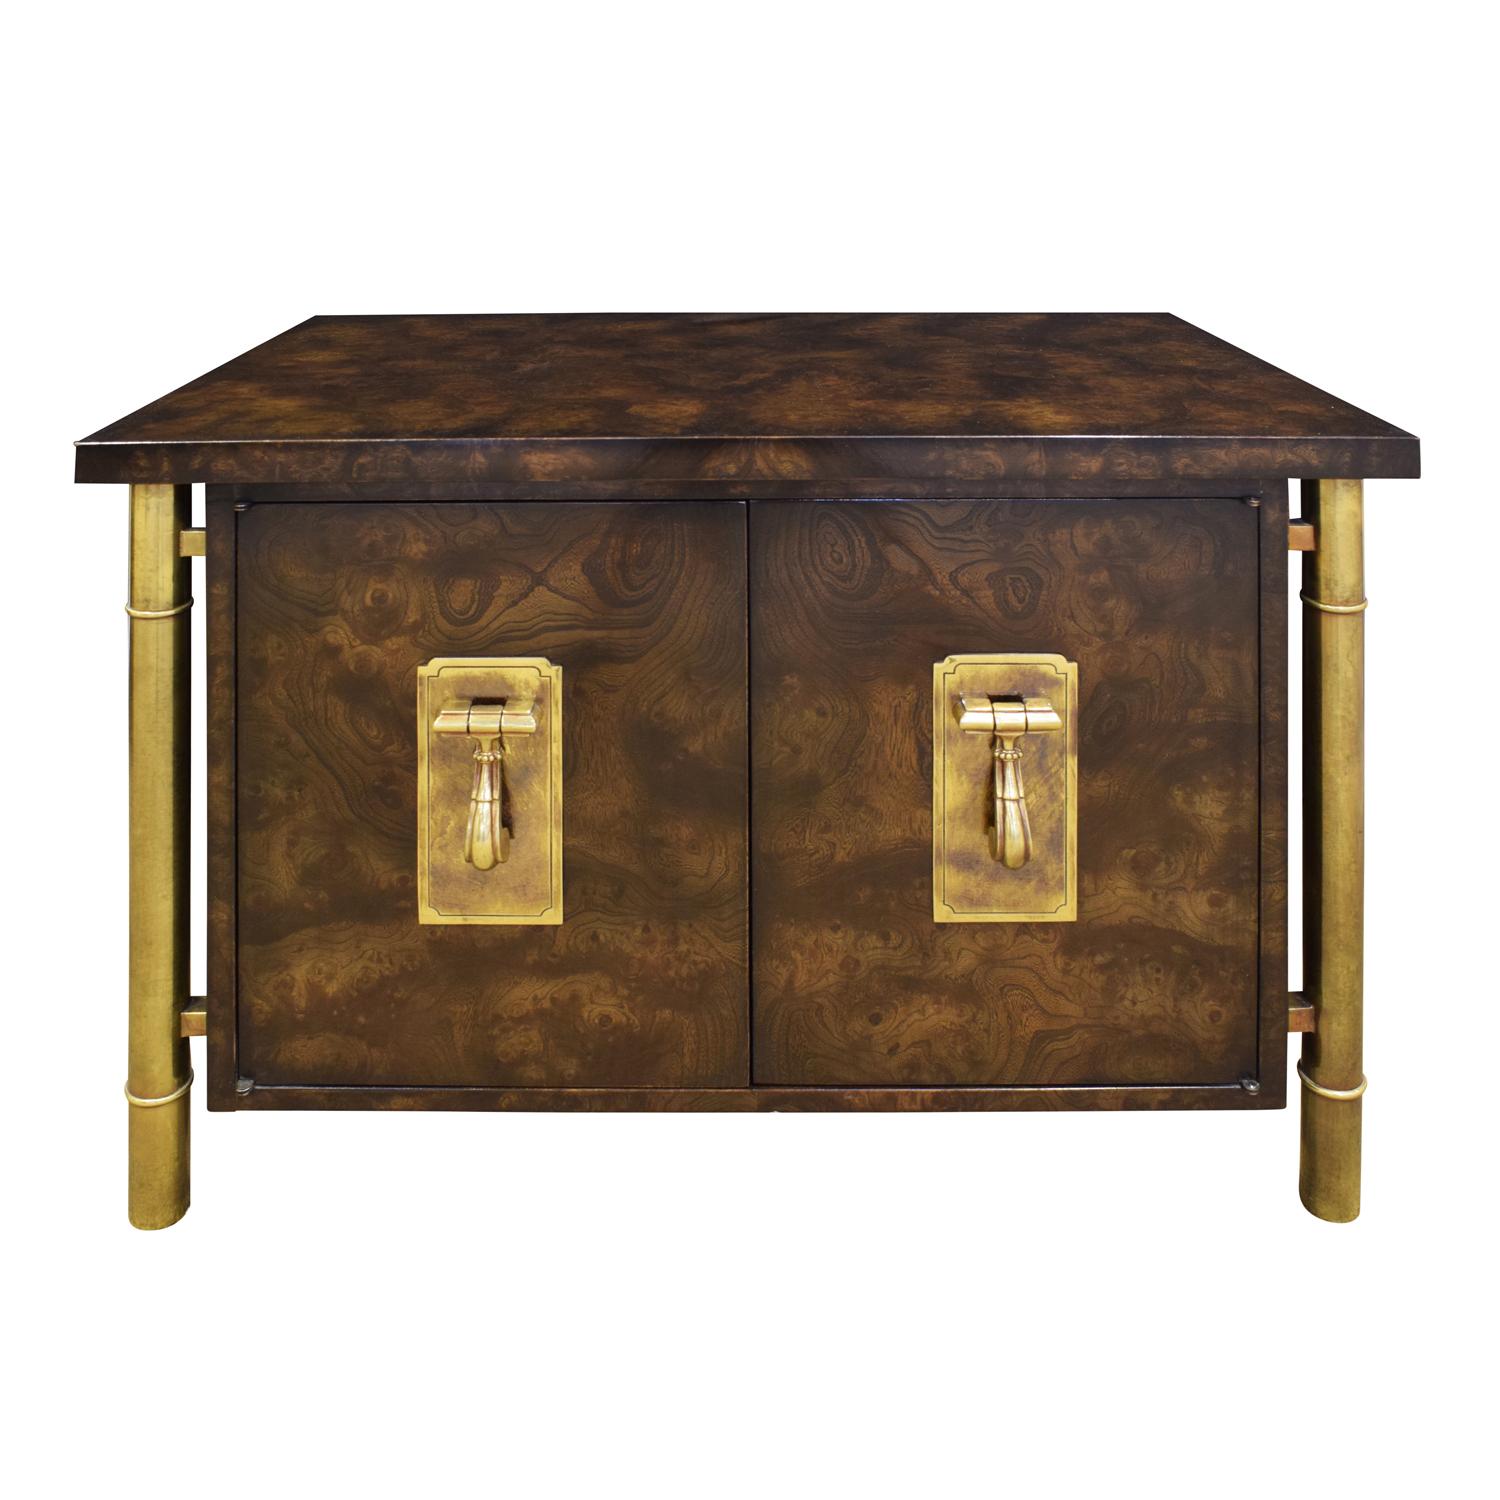 Pair of luxurious bedside tables in Carpathian elm and brass, each with 2 doors, by William Doezema for Mastercraft, American, 1960s. These are beautifully crafted.